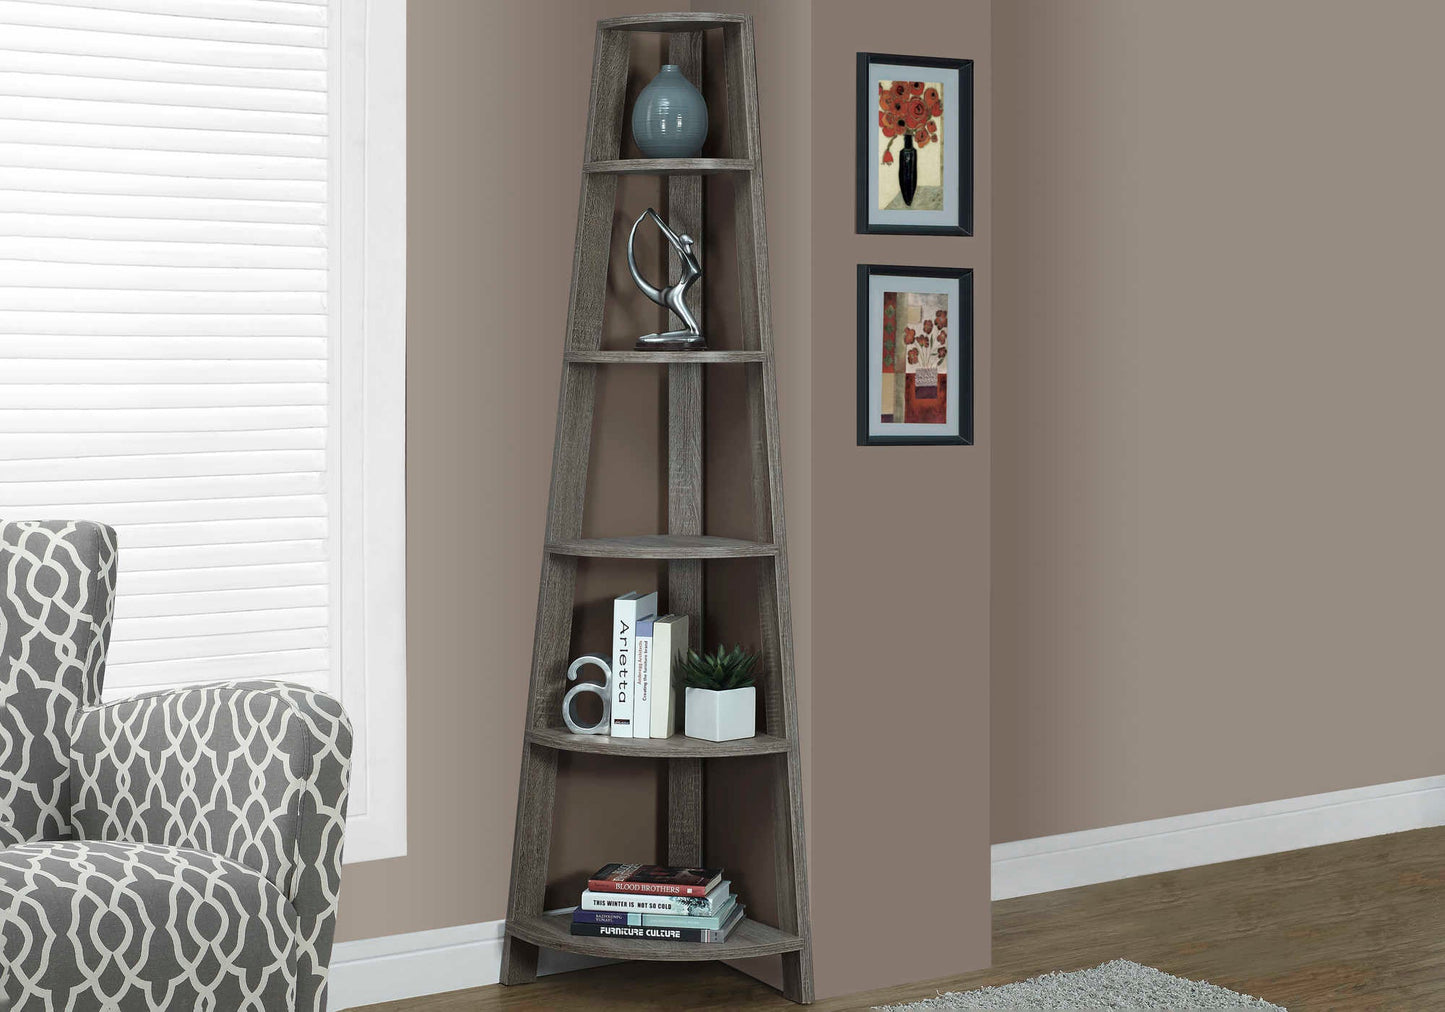 72"H French Etagere Corner Accent Bedroom Bookcase